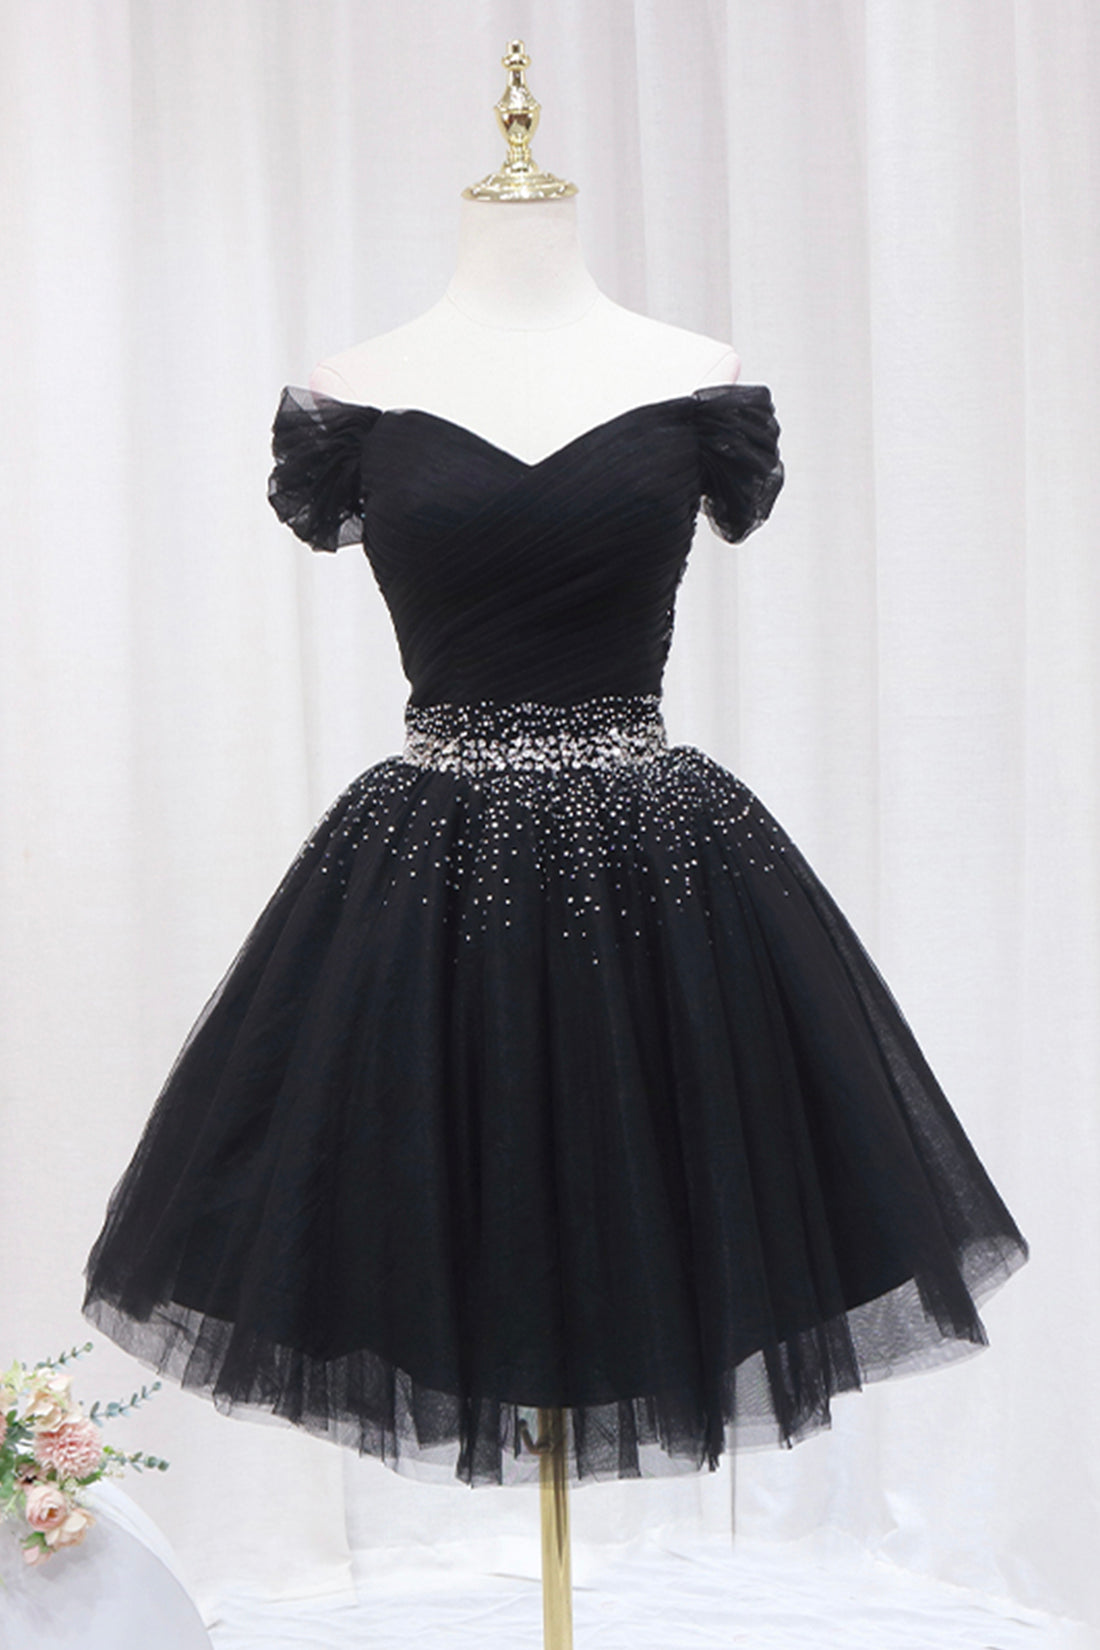 Black Tulle Beaded Short Corset Prom Dress, Off Shoulder Evening Party Dress Outfits, Bridal Dress